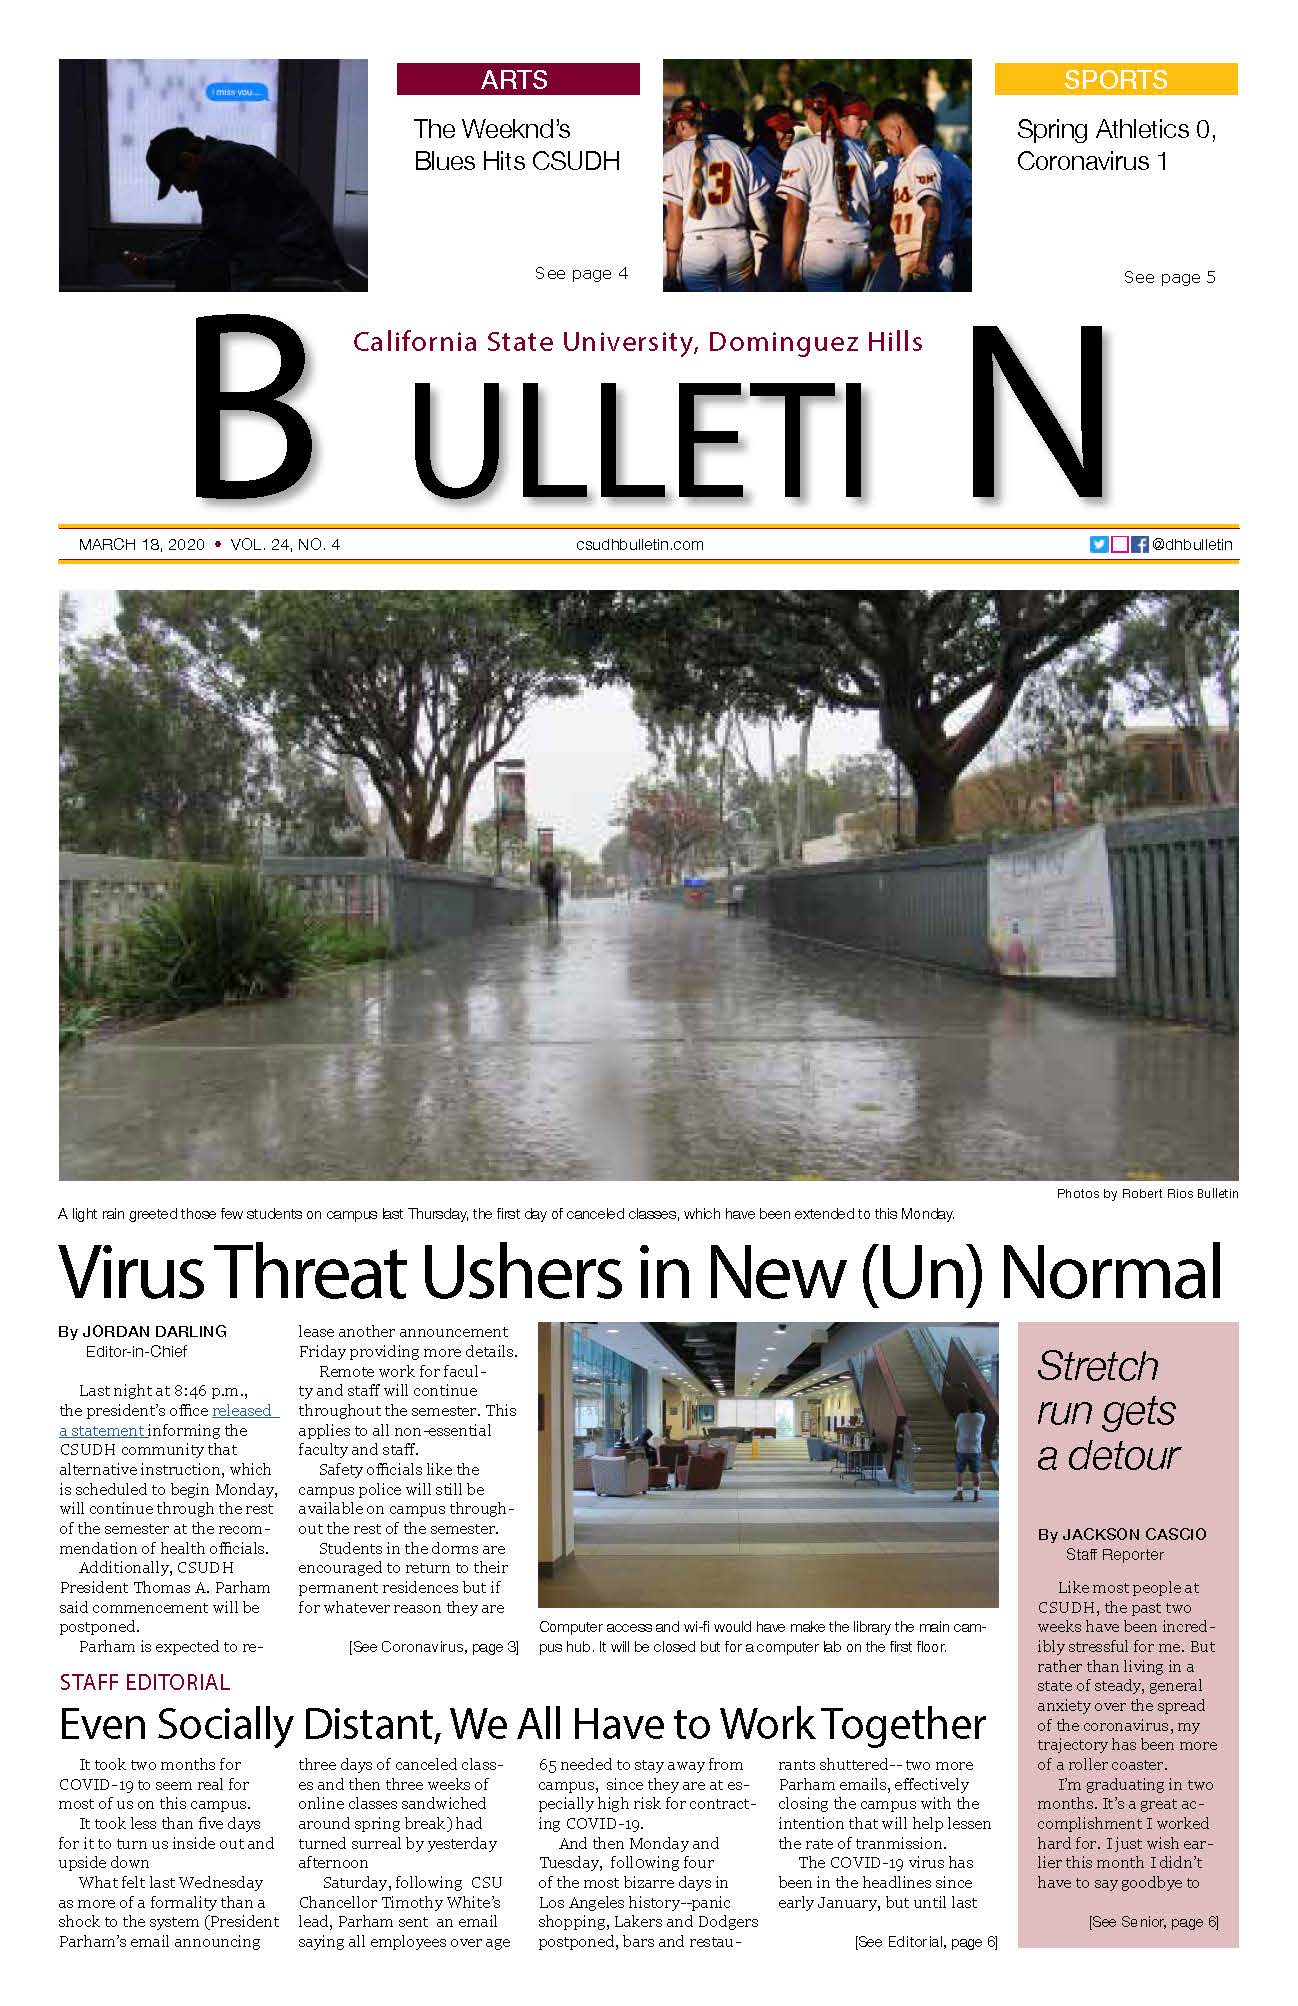 The day after the March 16, 2020 announcement that all instruction would be temporarily suspended, the CSUDH Bulletin newspaper produced its regularly scheduled edition,  followed a week later by a special edition. 